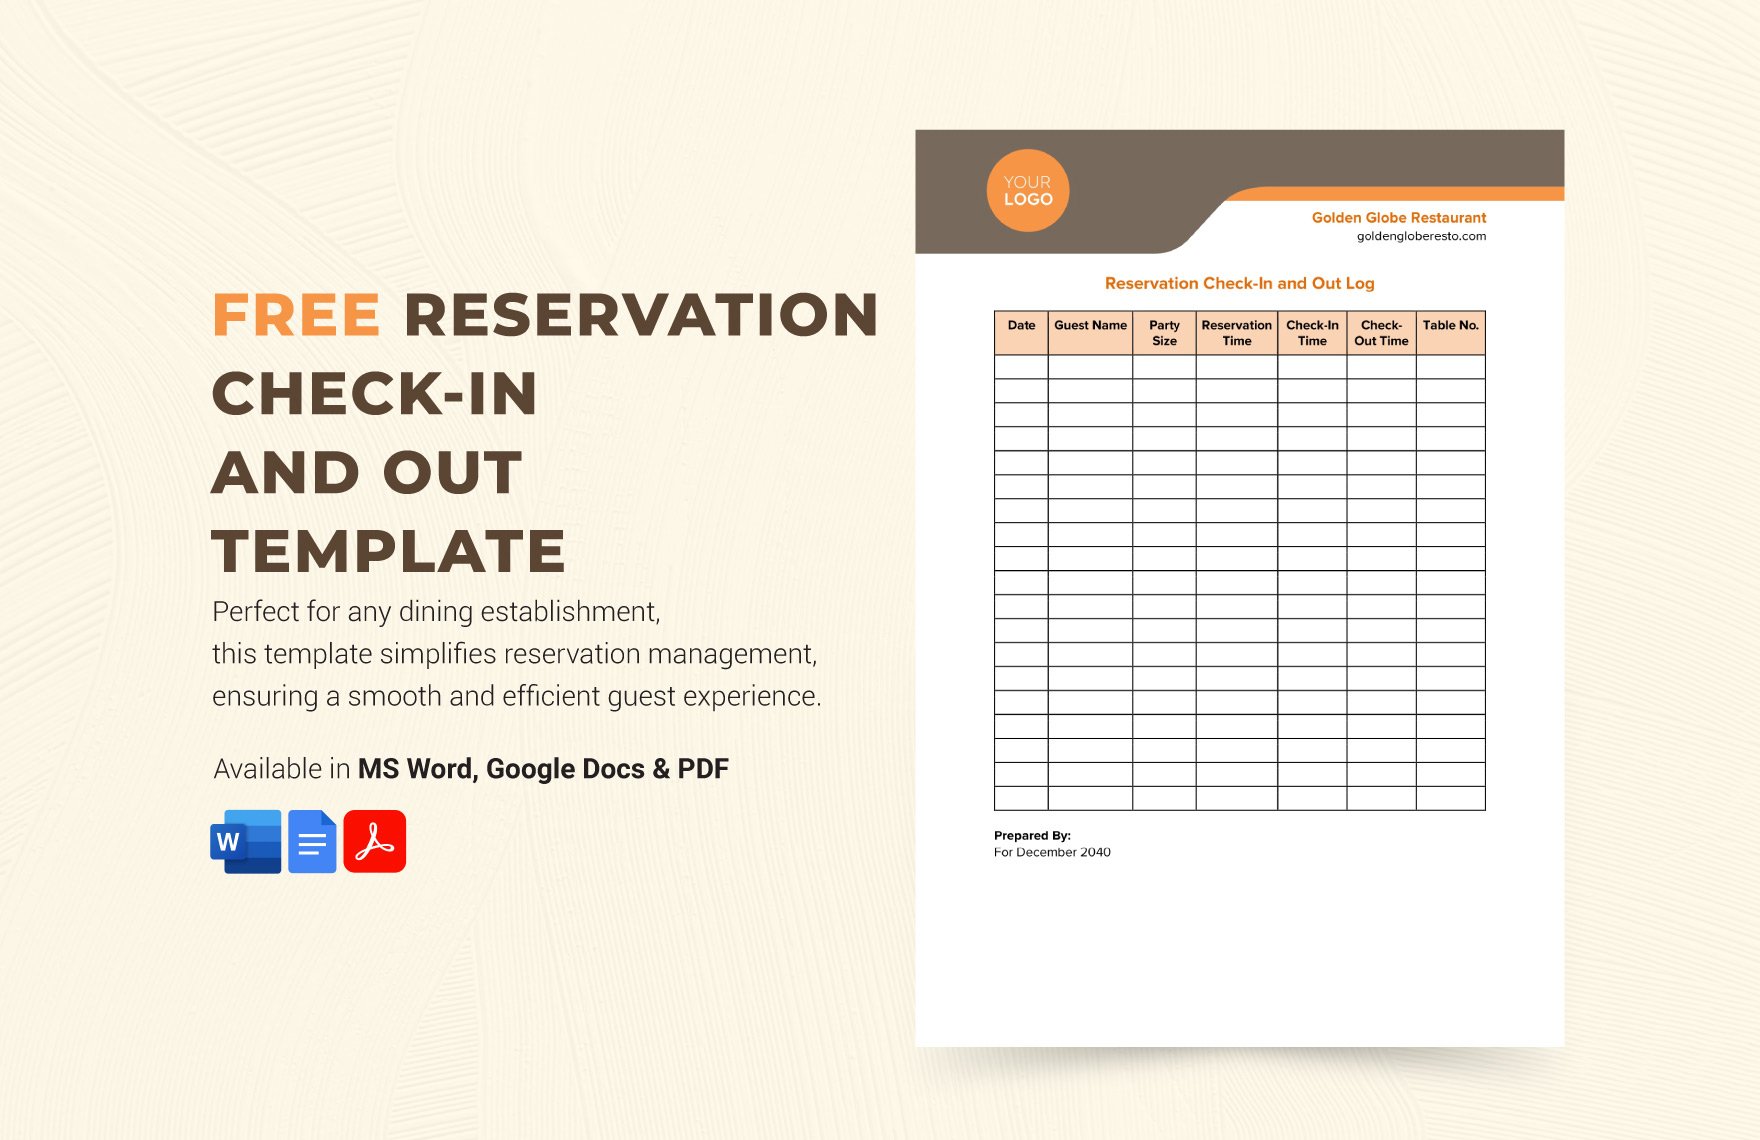 Reservation Check-in and Out Template